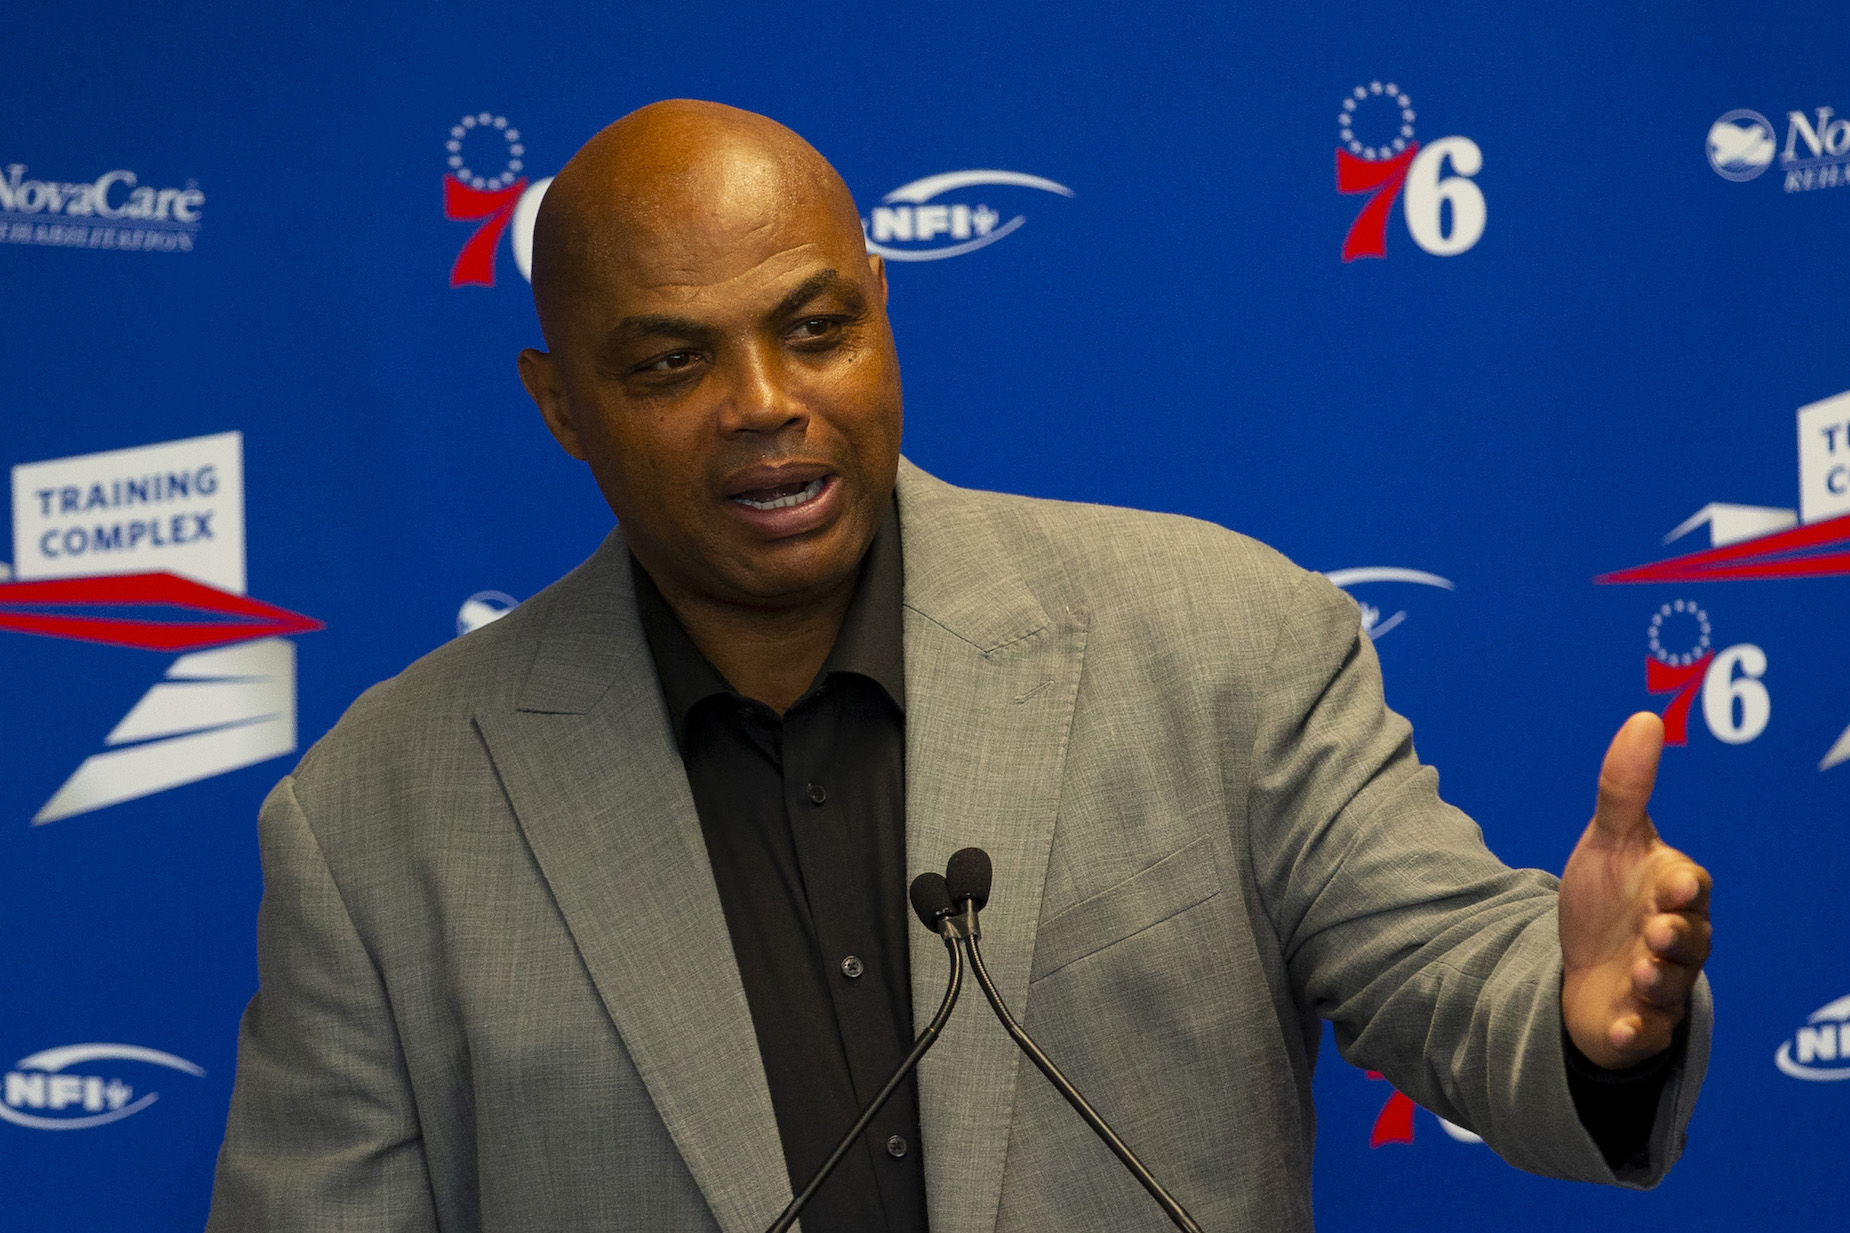 While Charles Barkley has made some bad decisions during his life, he's also used his sizable net worth for some good causes.